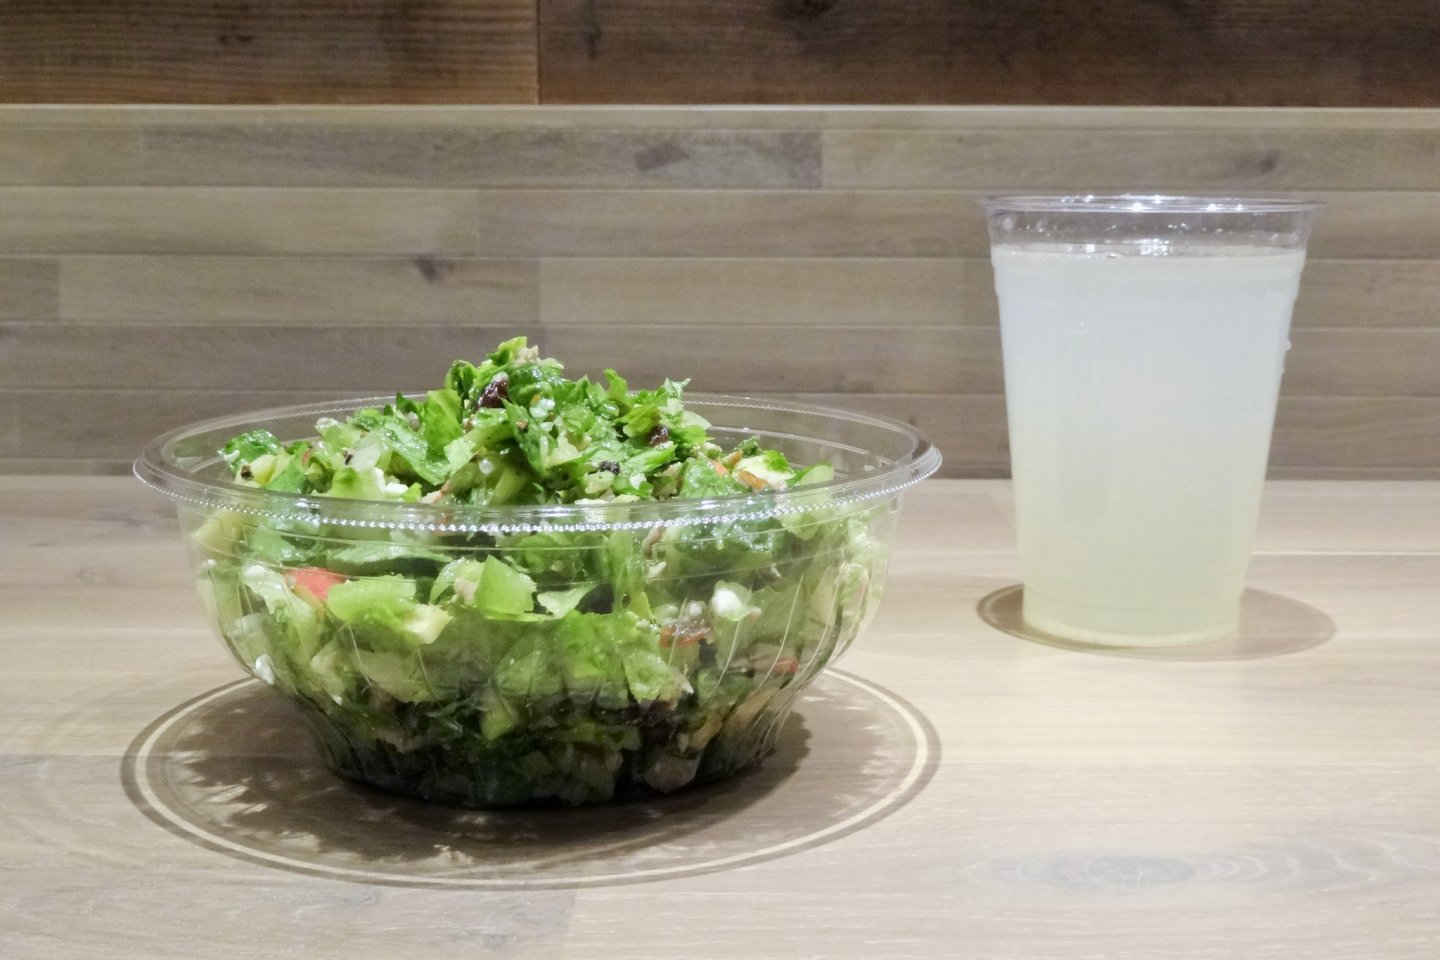 A salad and a homemade lemonade make for a filling lunch